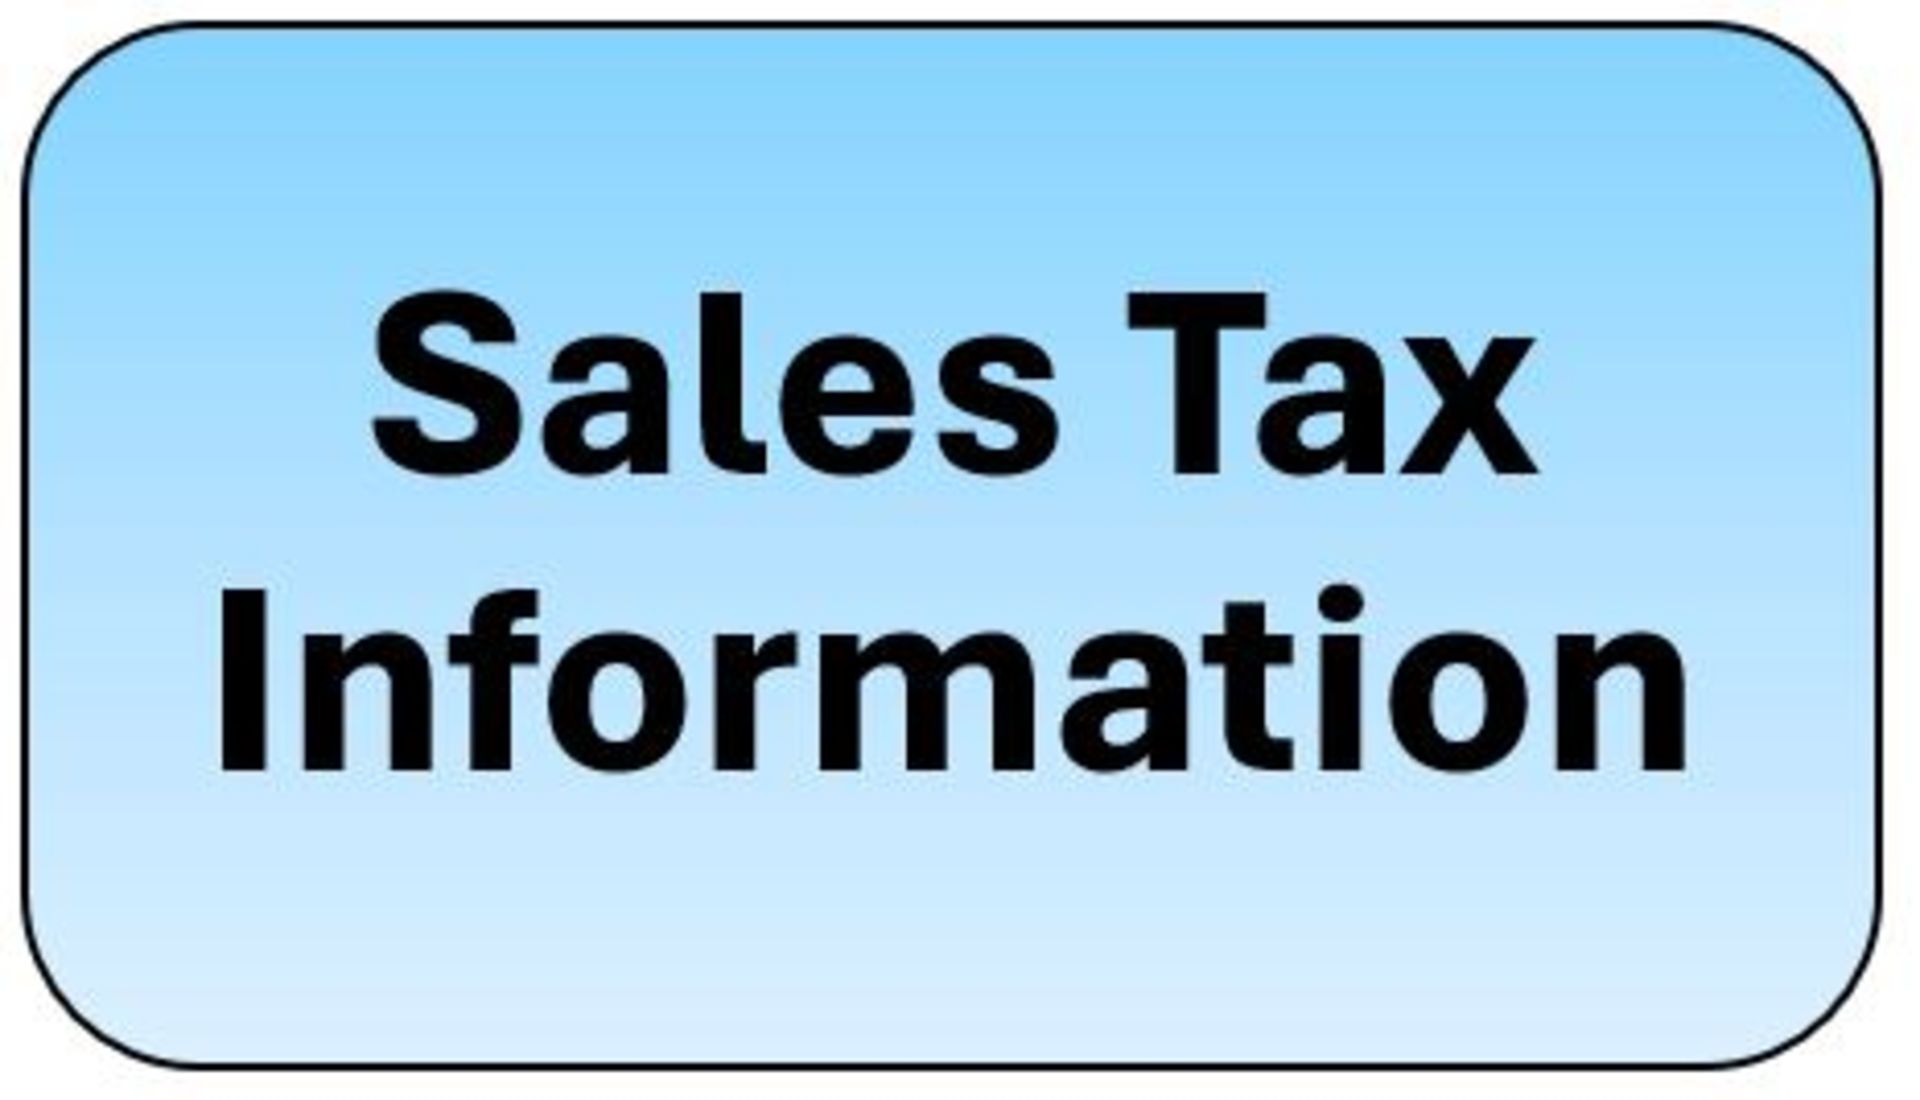 SALES TAX - 6% All bidders will be charged sales tax unless they return the tax exemption form